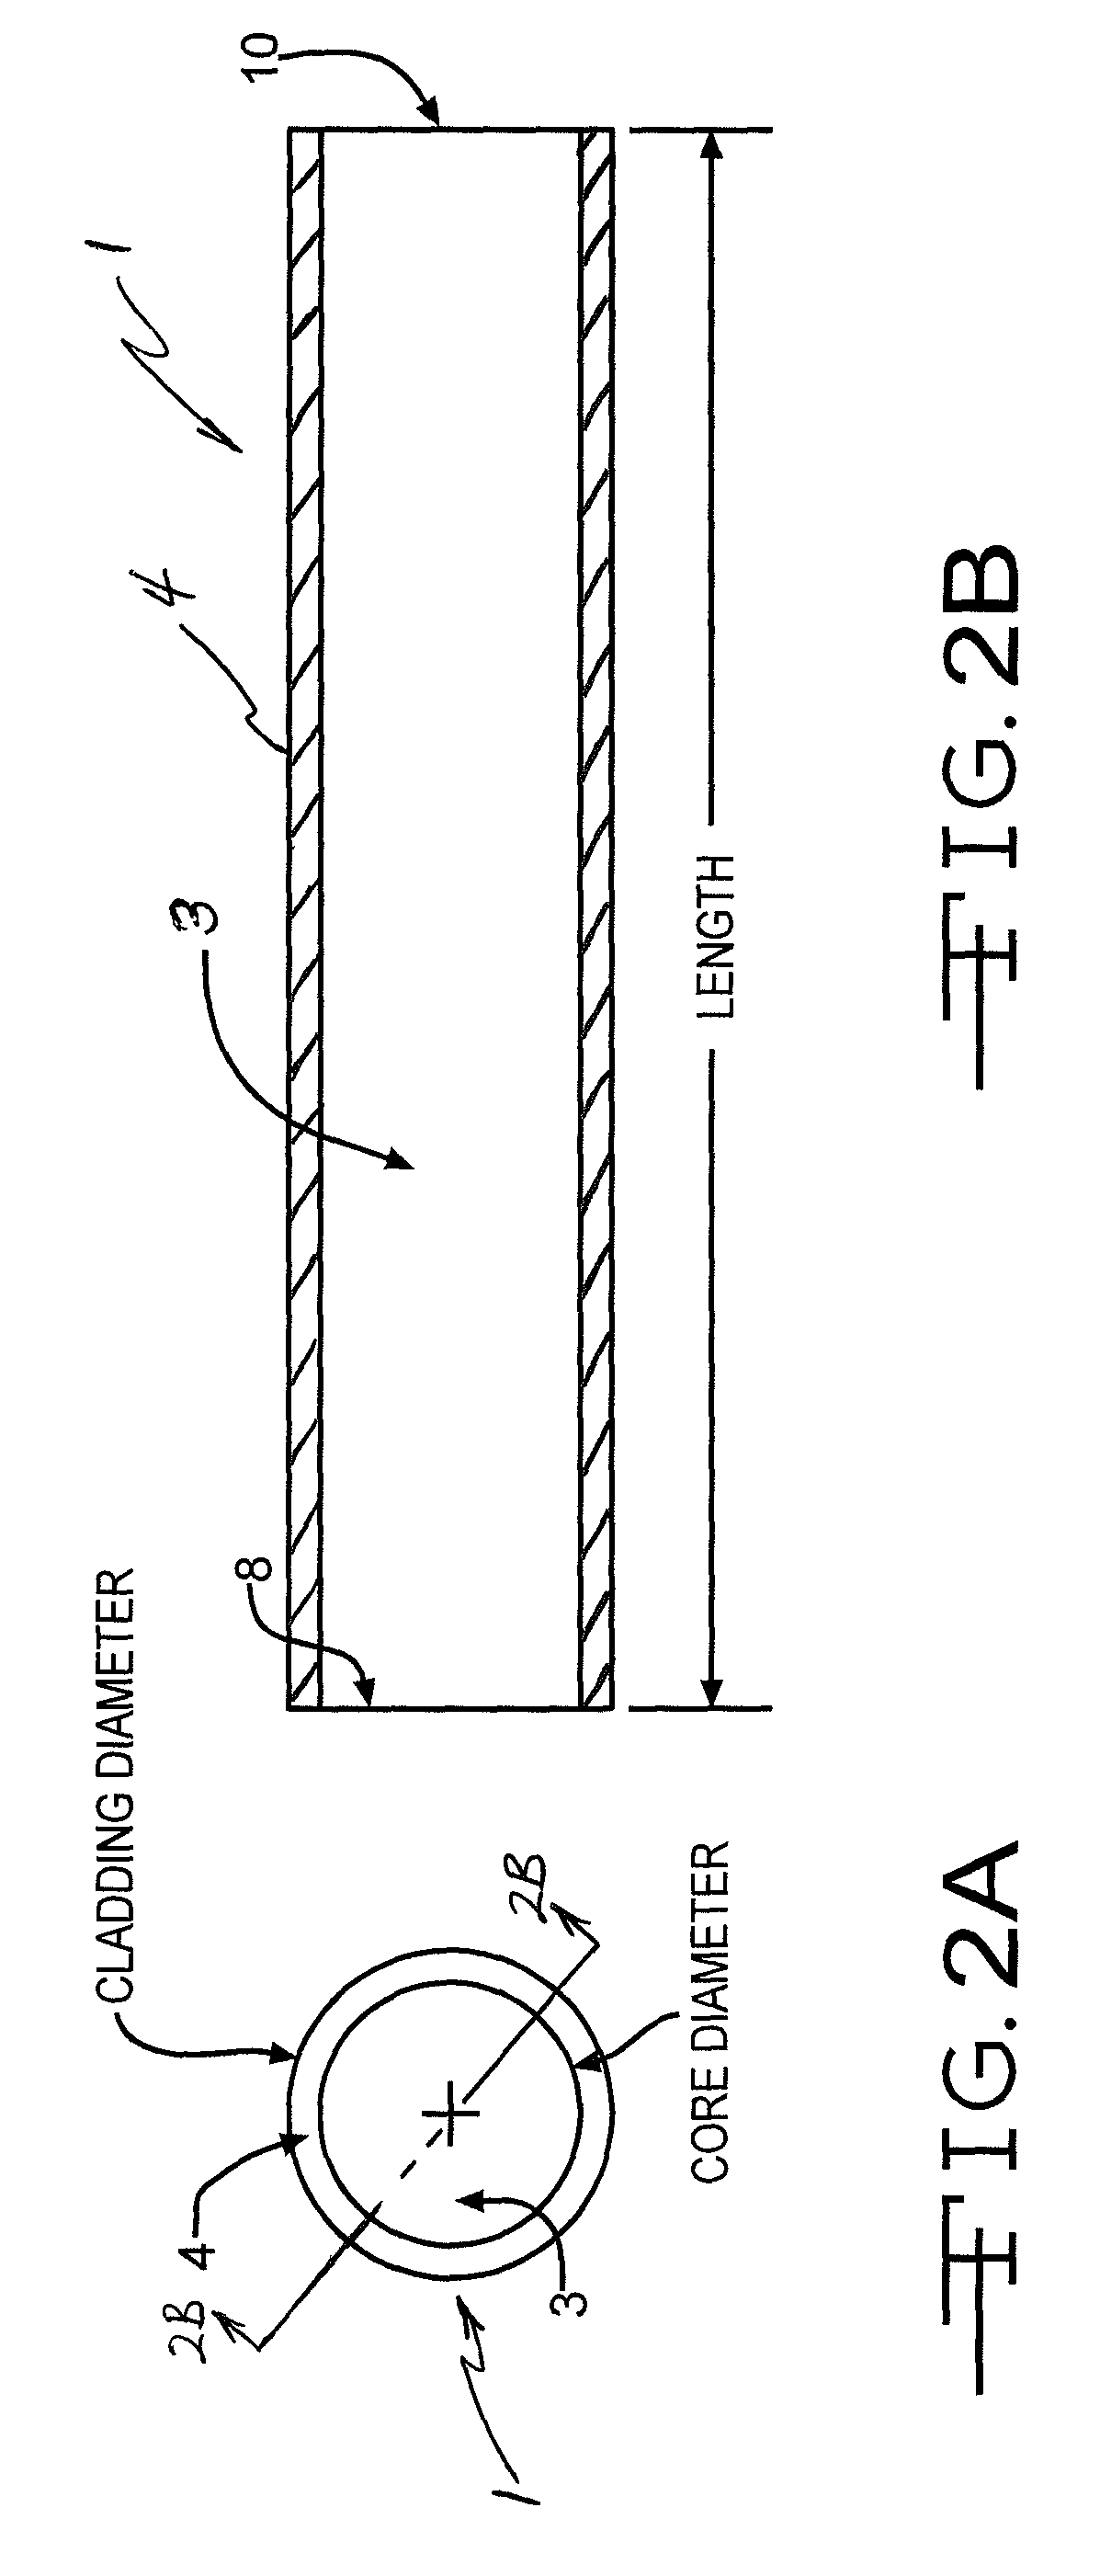 Acoustic waveguide plate with nonsolid cores